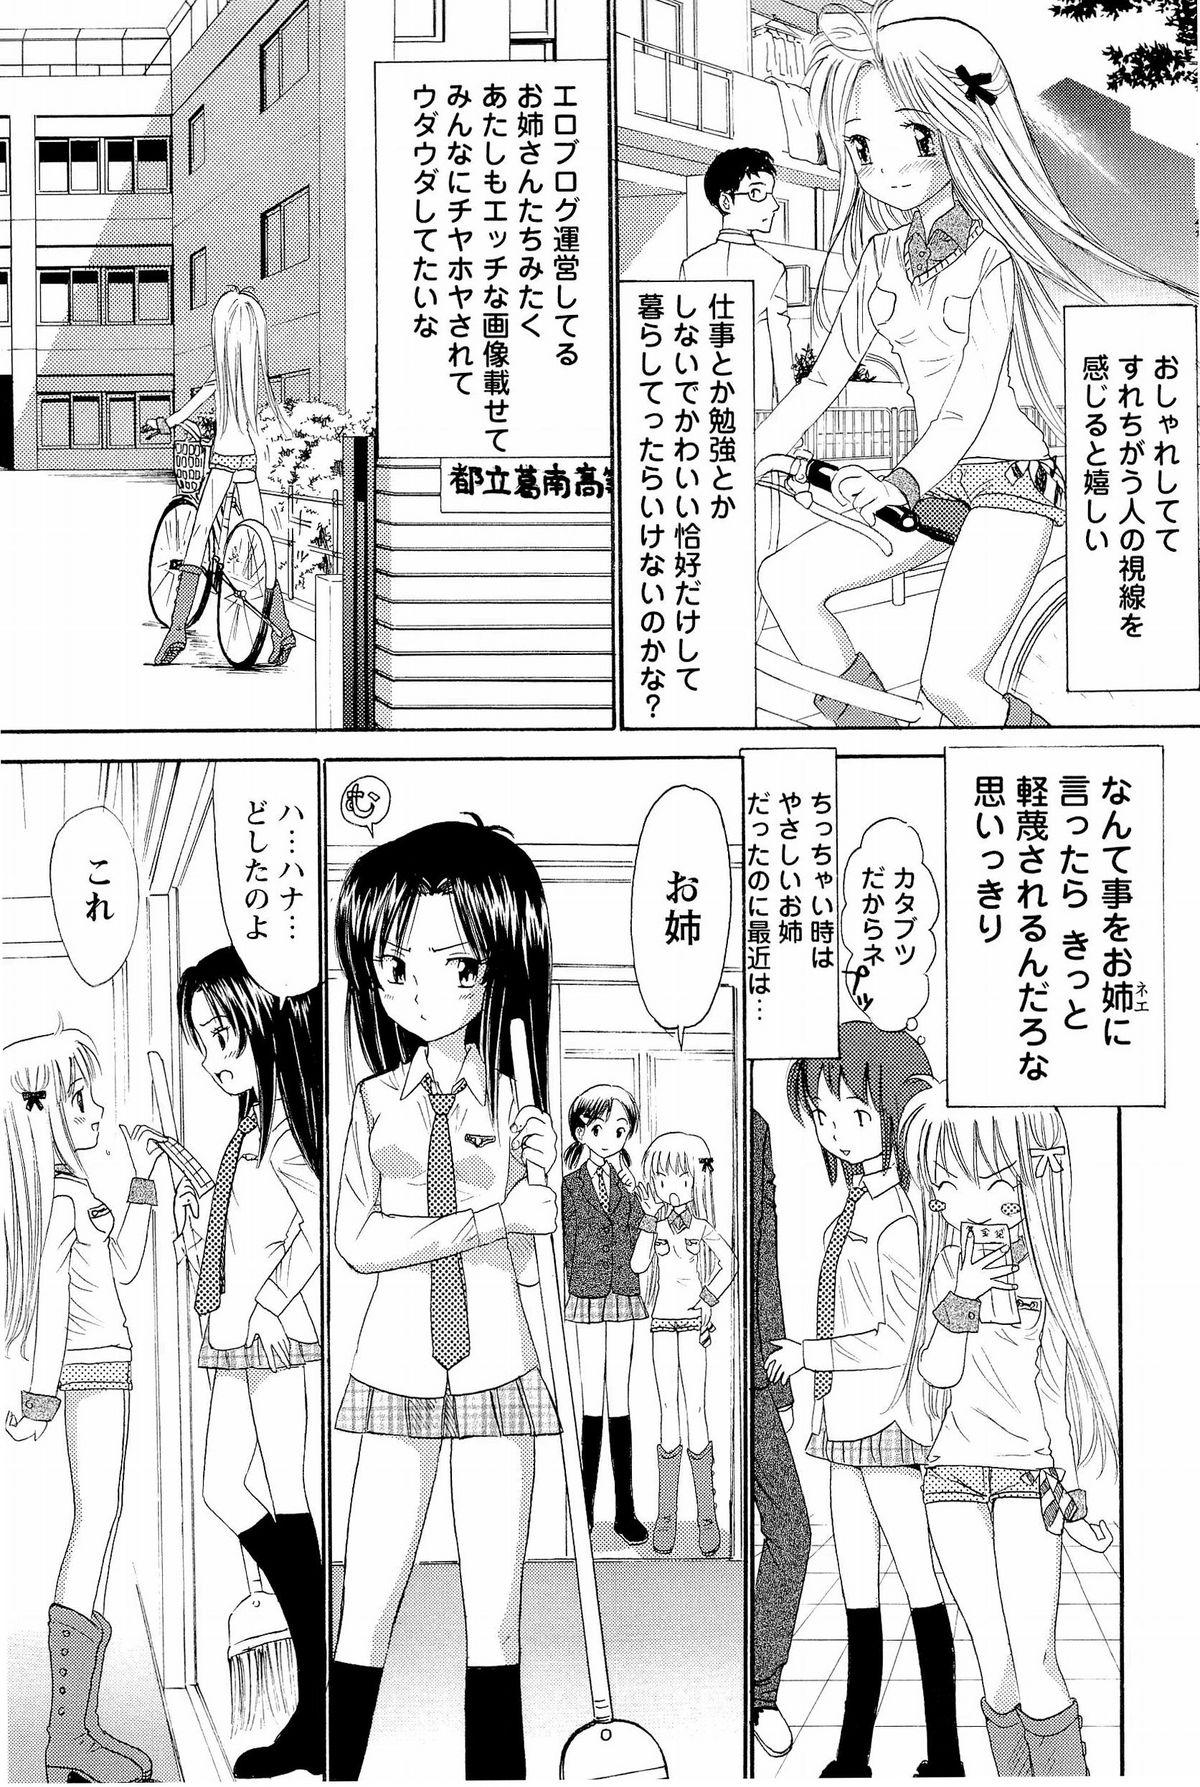 Pussylicking Ane Imouto Caught - Page 6